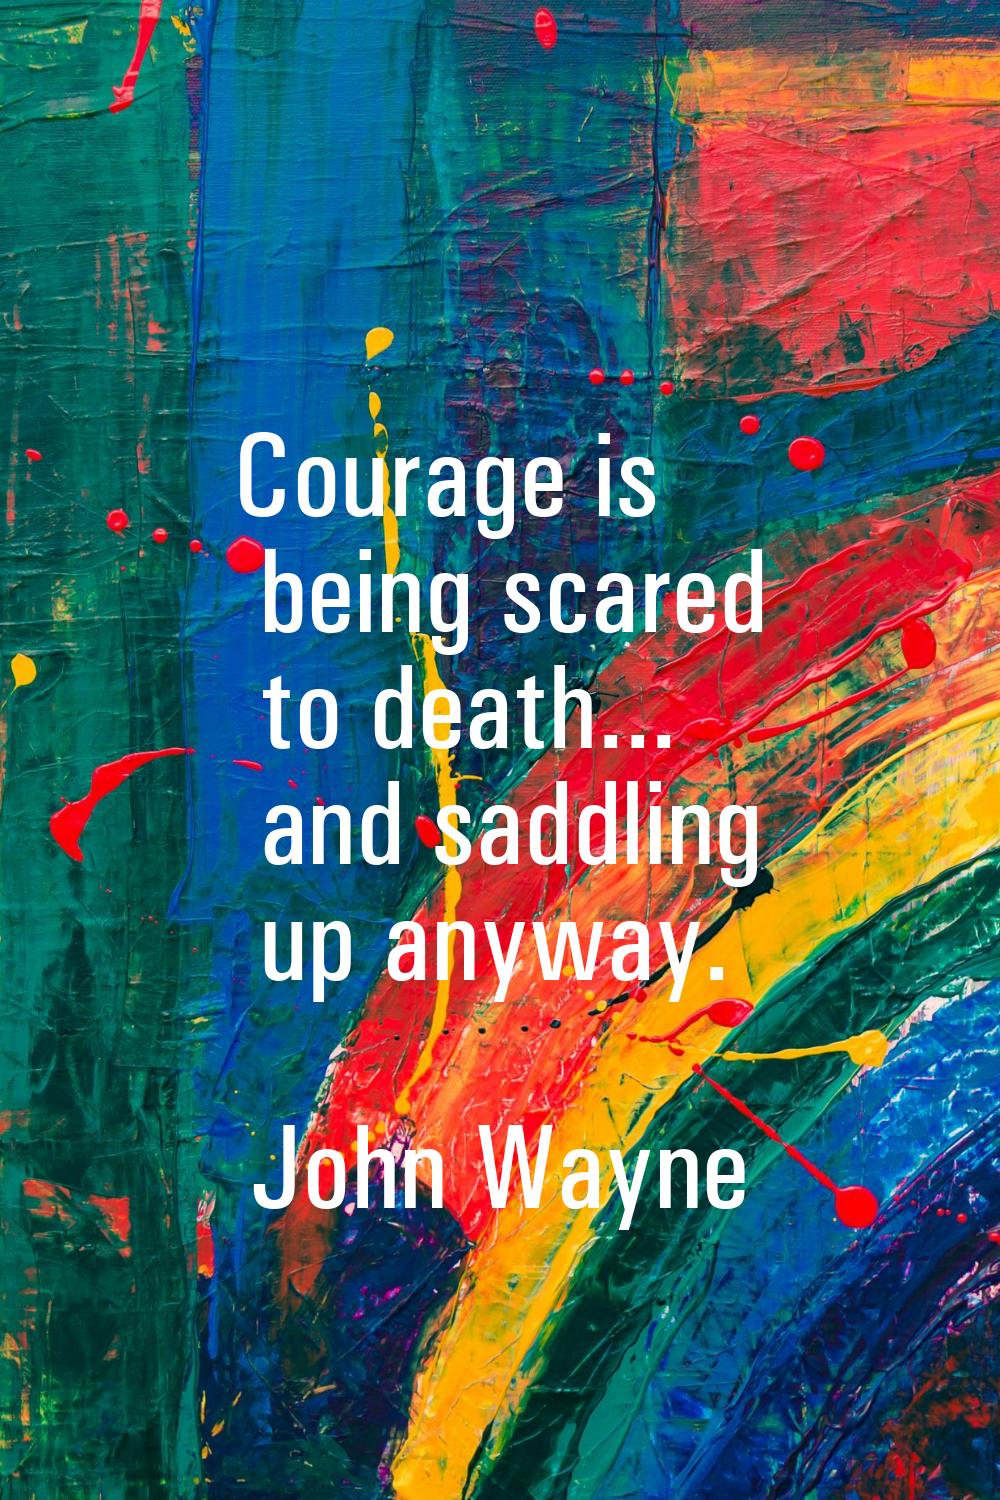 Courage is being scared to death... and saddling up anyway.